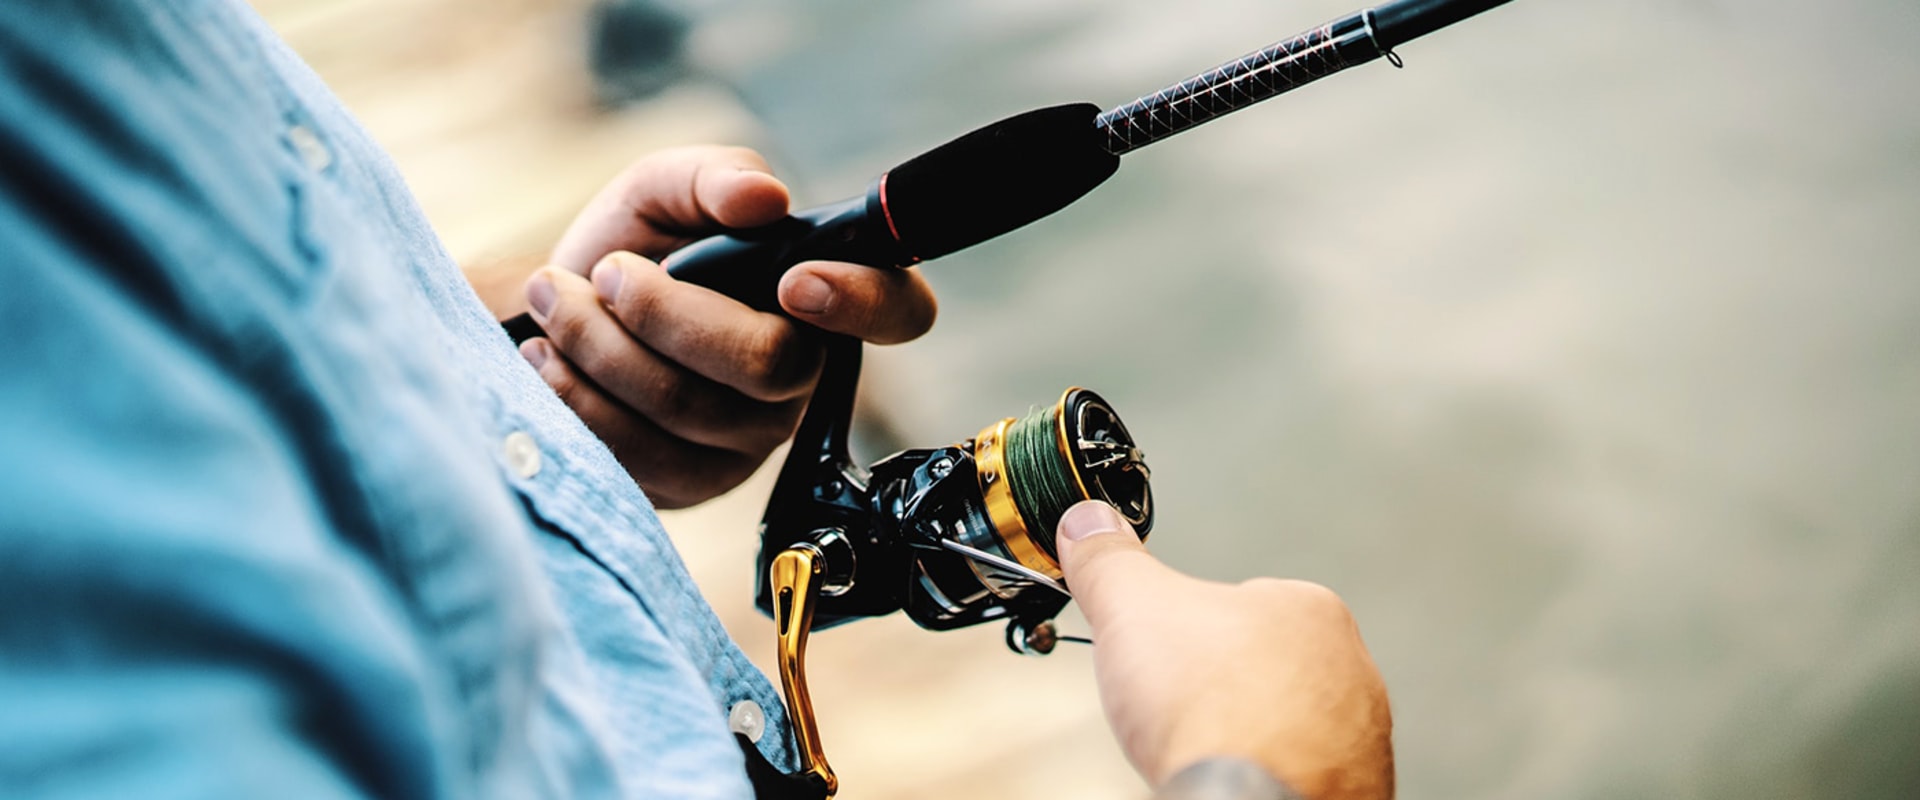 Why is fishing expensive hobby?